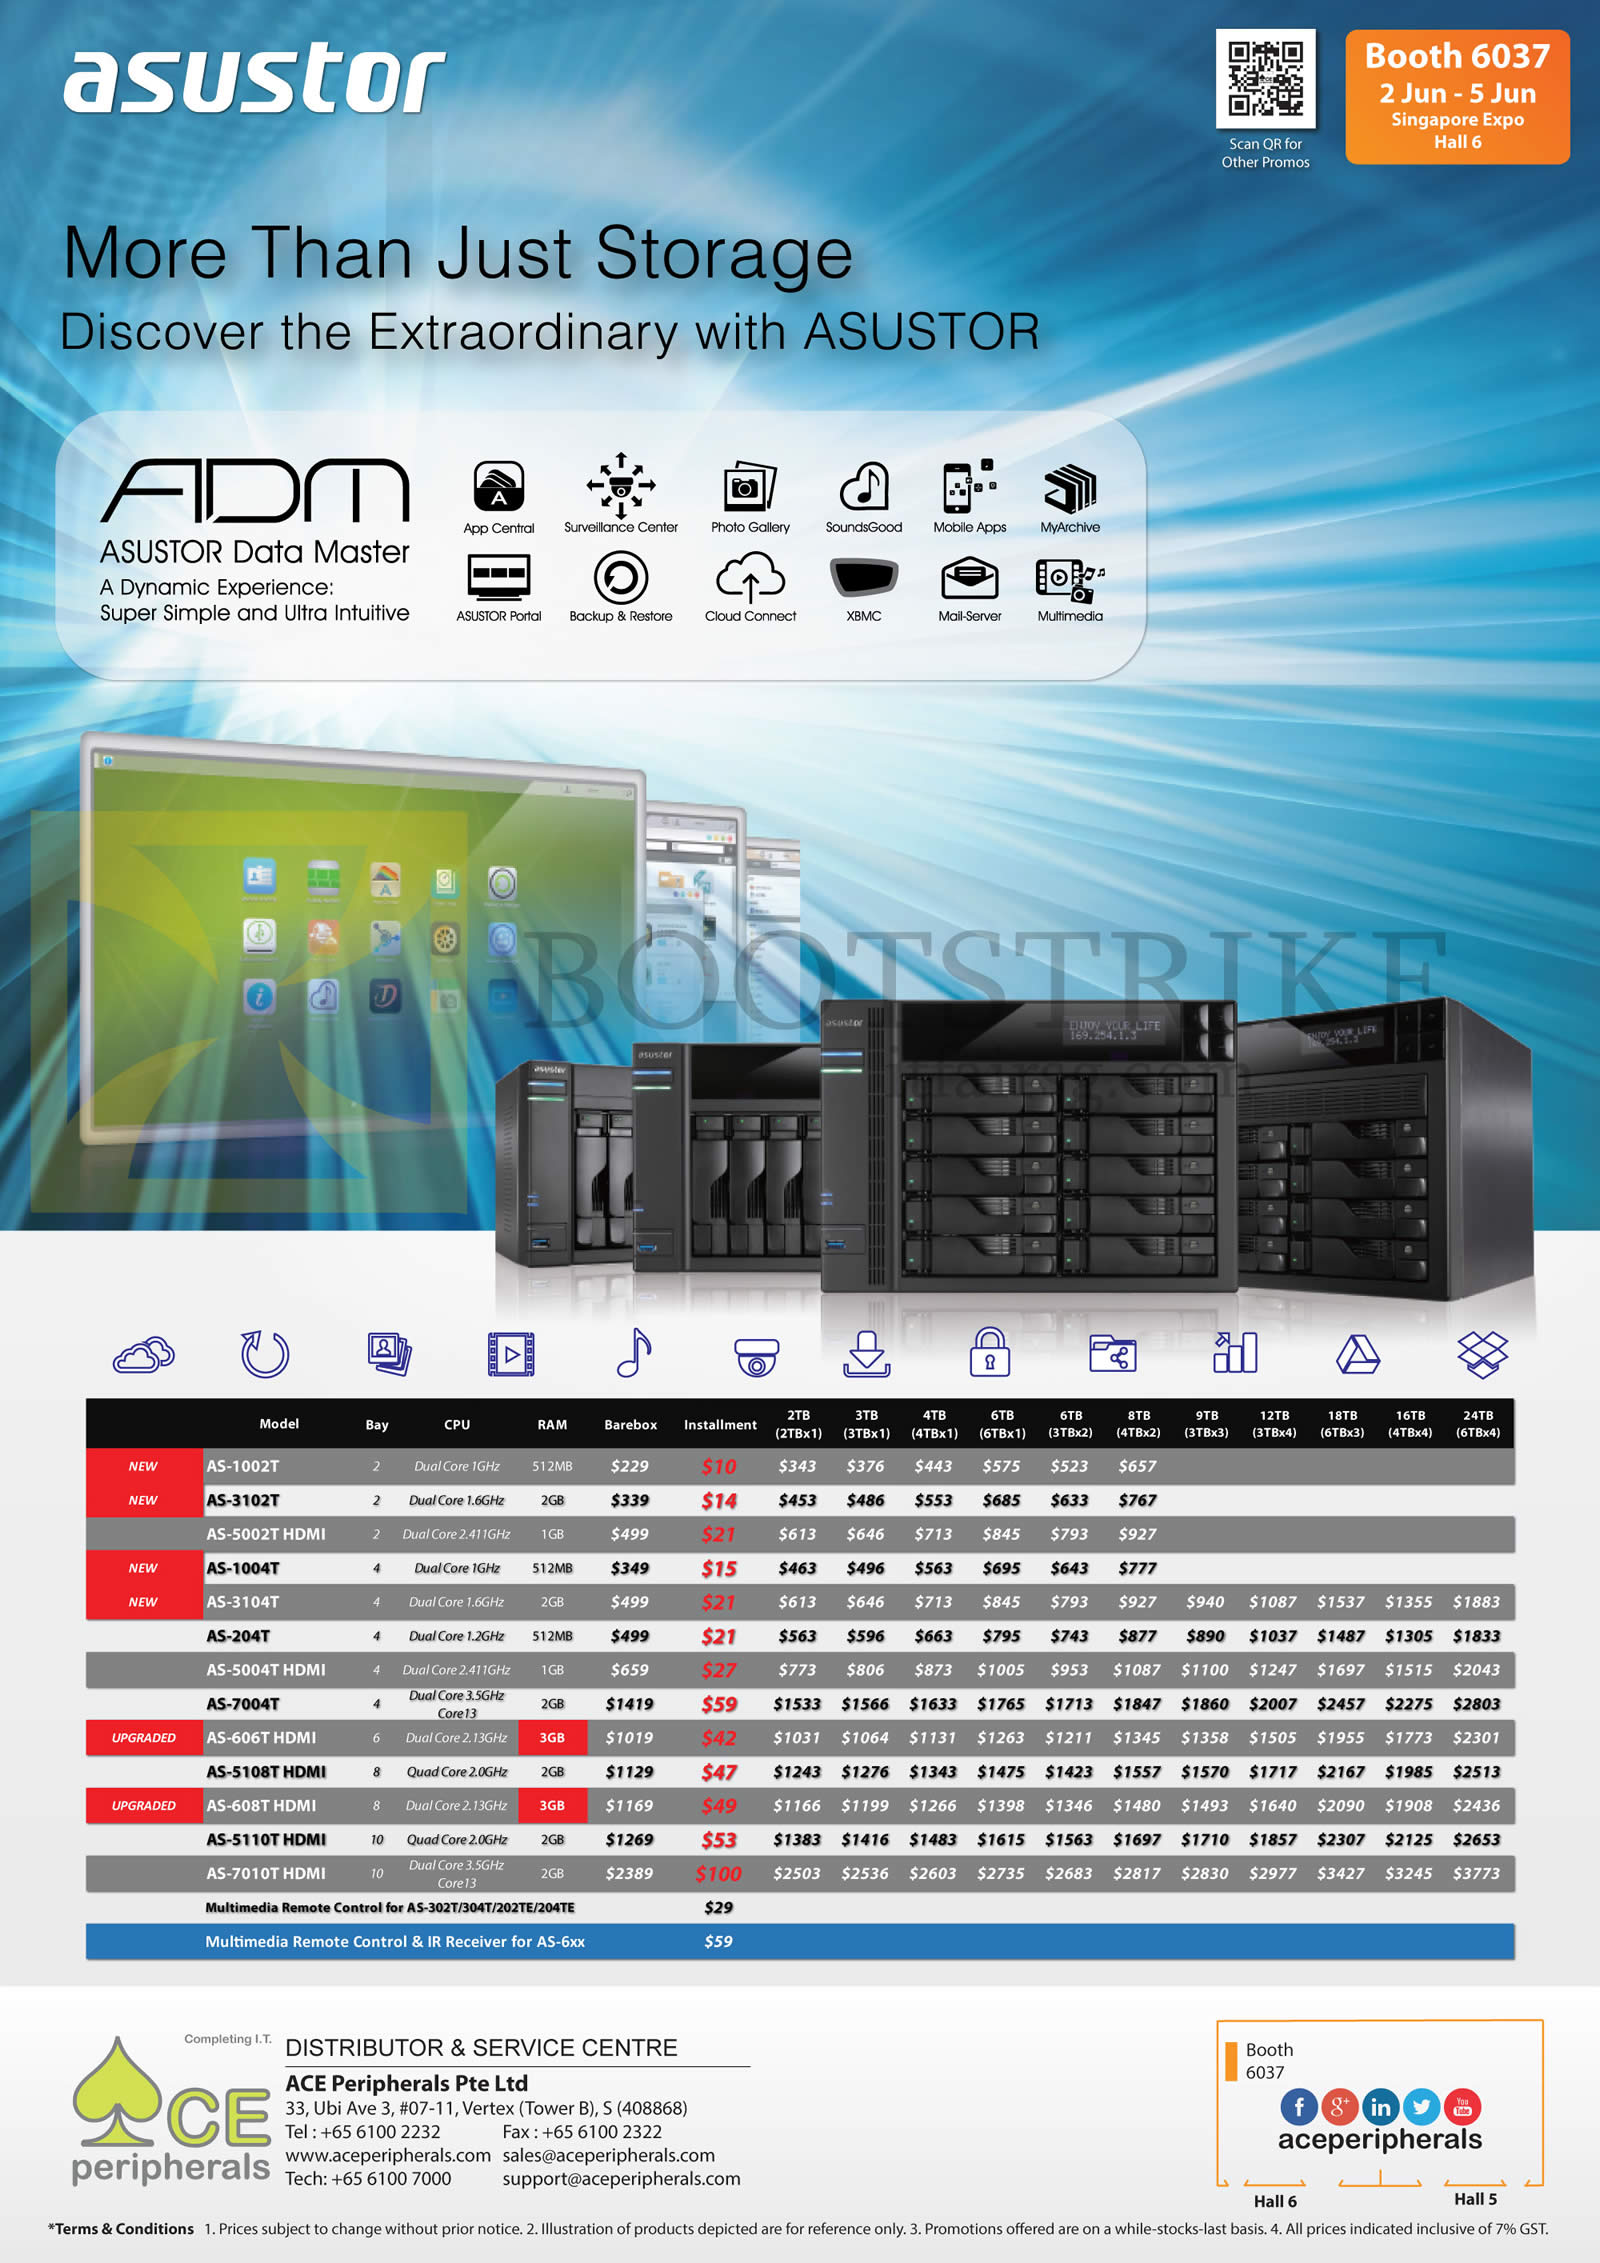 PC SHOW 2016 price list image brochure of ACE Peripherals Asustor NAS A-1002T, 3102T, 5002T HDMI, 1004T, 3104T, 204T, 5004T HDMI, 7004T, 606T, 5108T, 608T, 5110T, 7010T